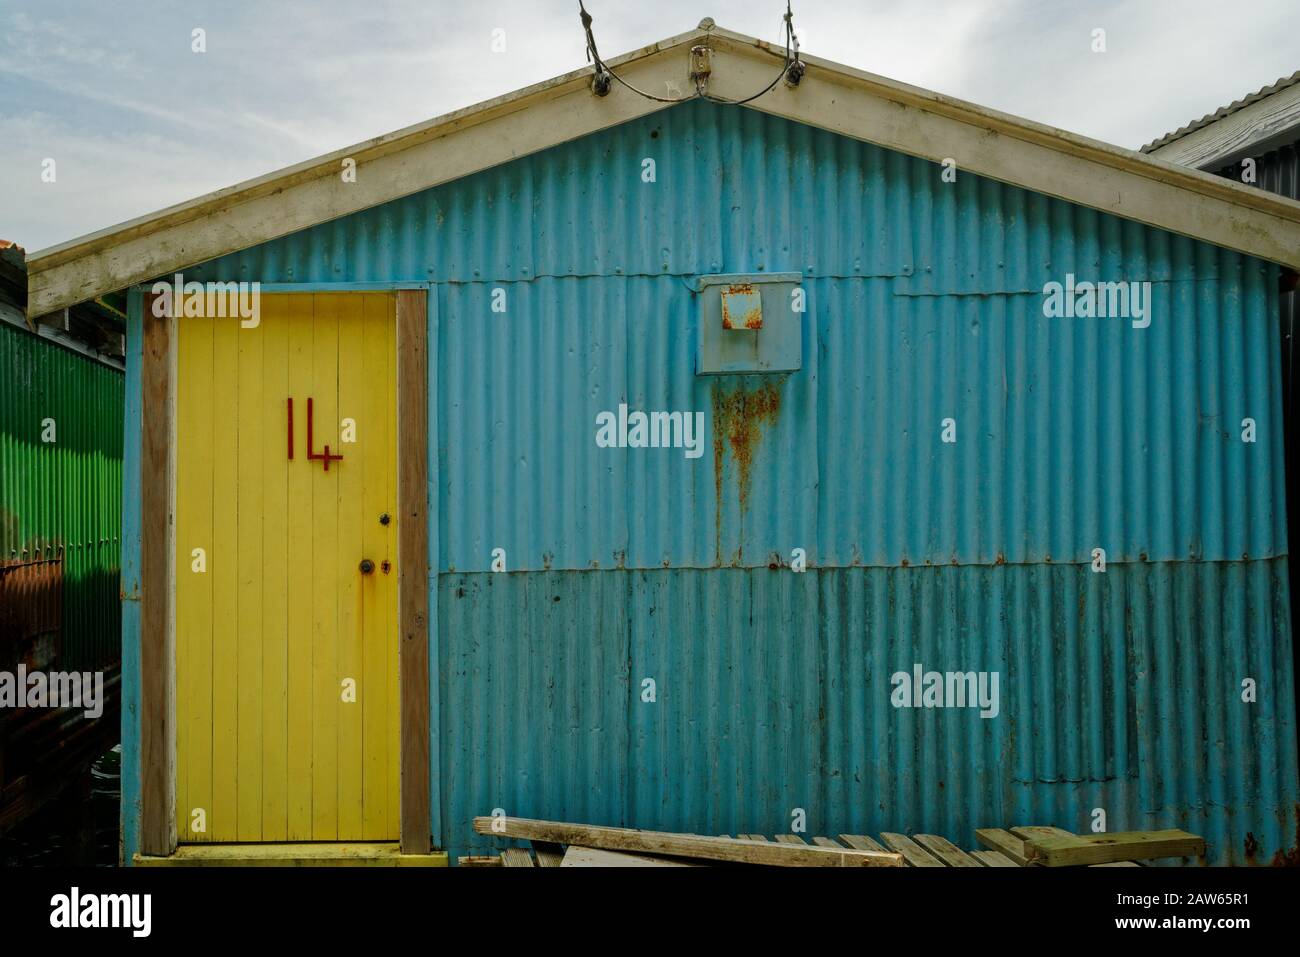 The number 14 in red on a rustic yellow shed door. Stock Photo